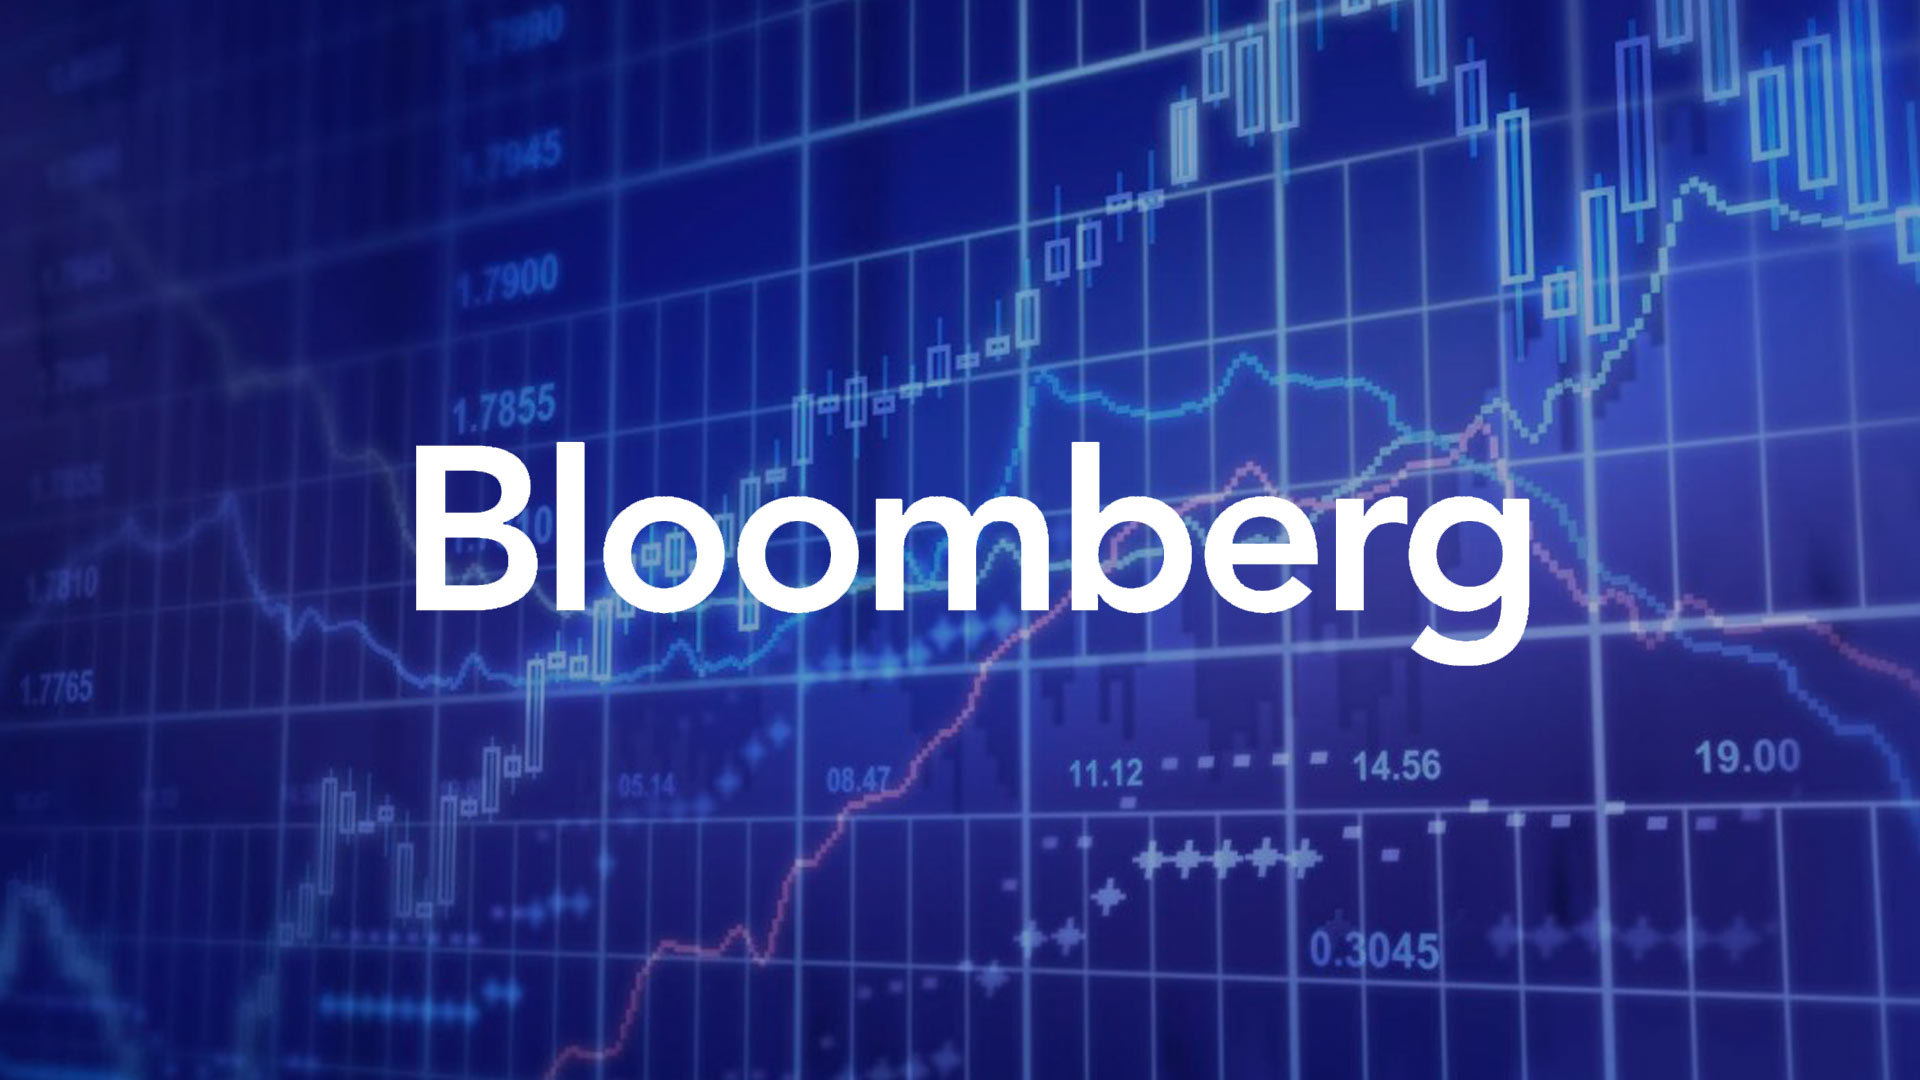 Notes for a Bloomberg interview